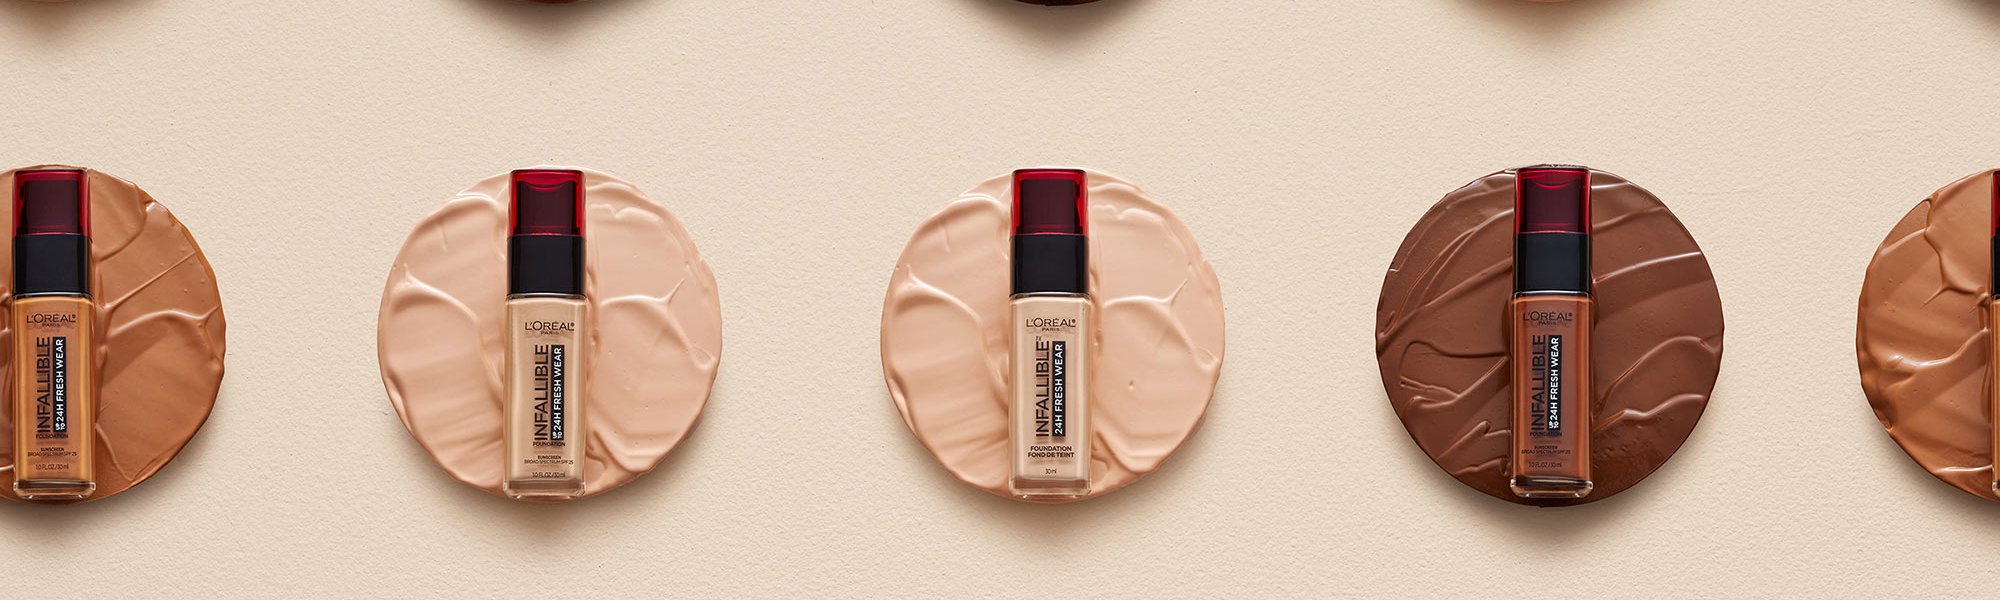 The Best Foundation For Every Skin Type